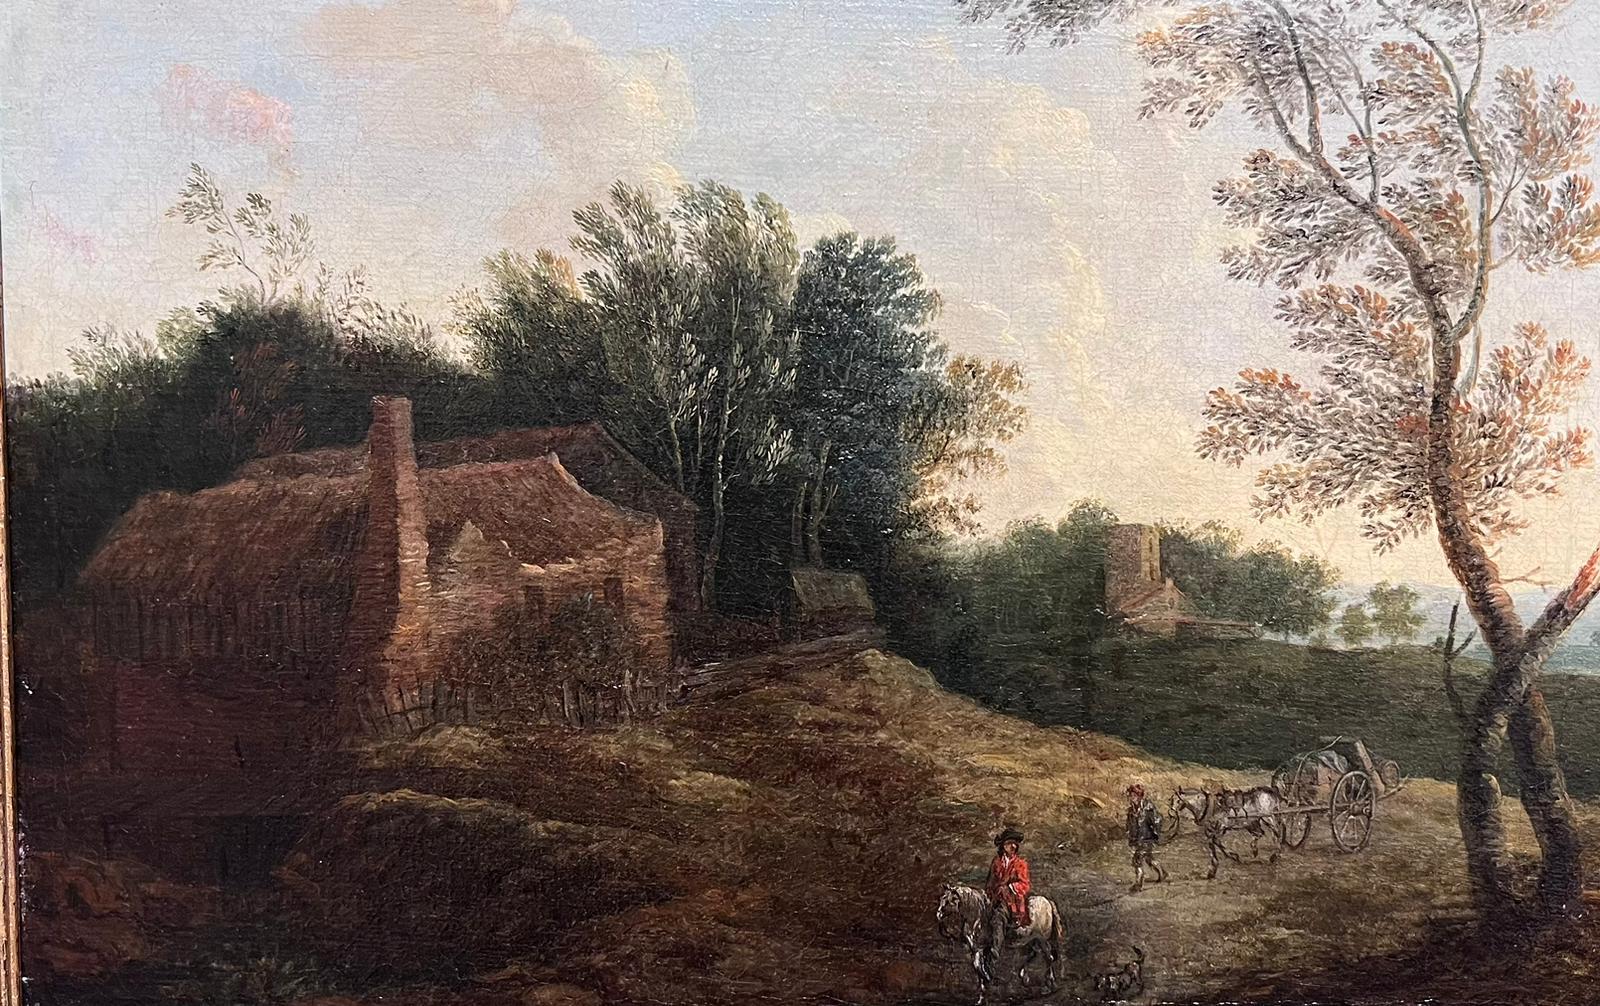 Travellers in a Country Landscape
circle of Jacques d'Arthois (Flemish 1613-1686)
oil on canvas, framed
frame: 13.5 x 18.5 inches
canvas: 11 x 16 inches
provenance: private collection, UK
condition: very good and sound condition 